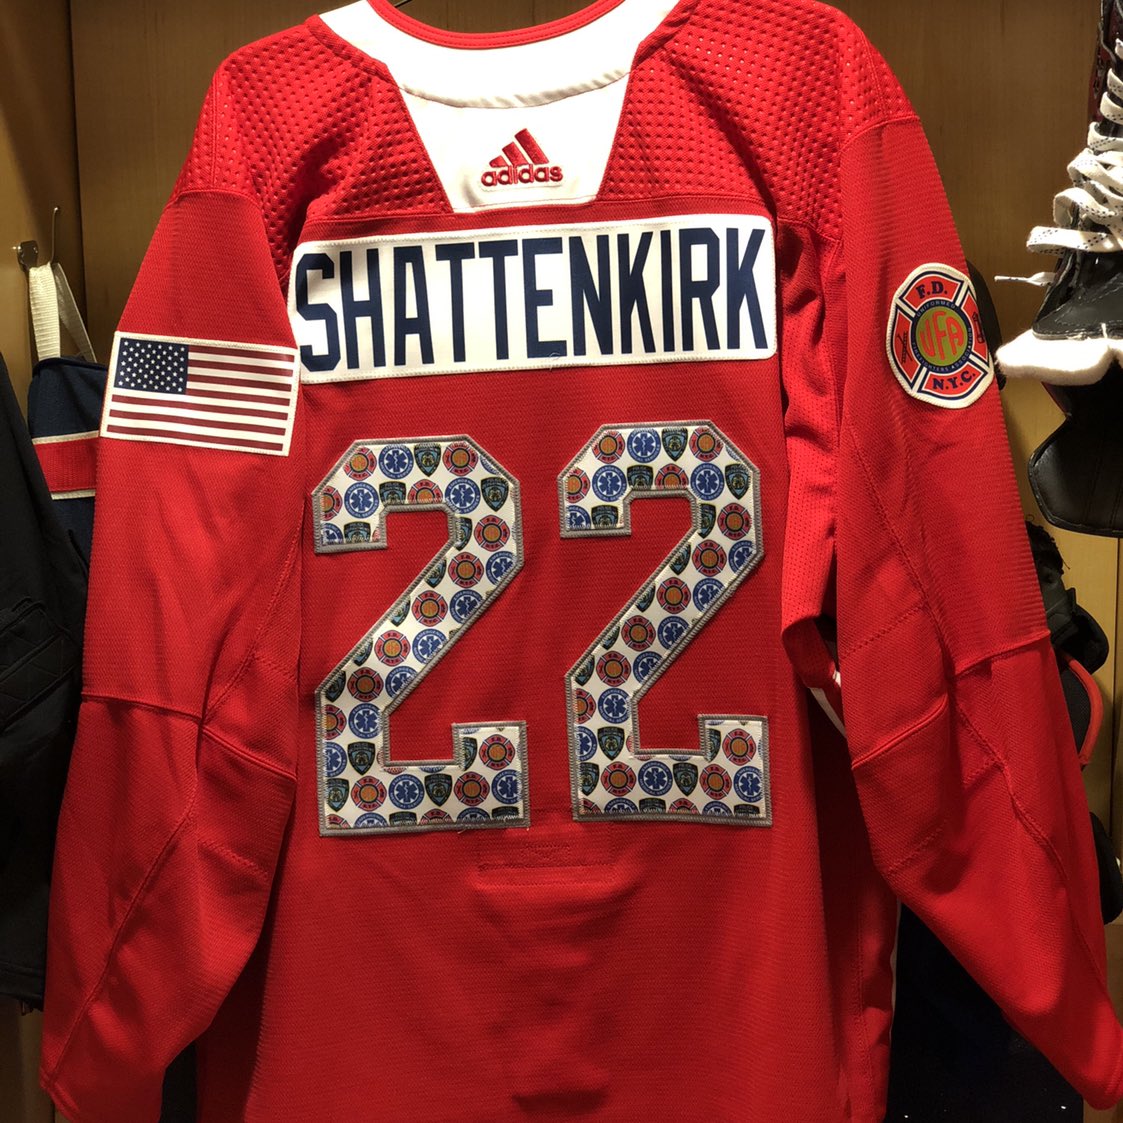 ny rangers first responders jersey